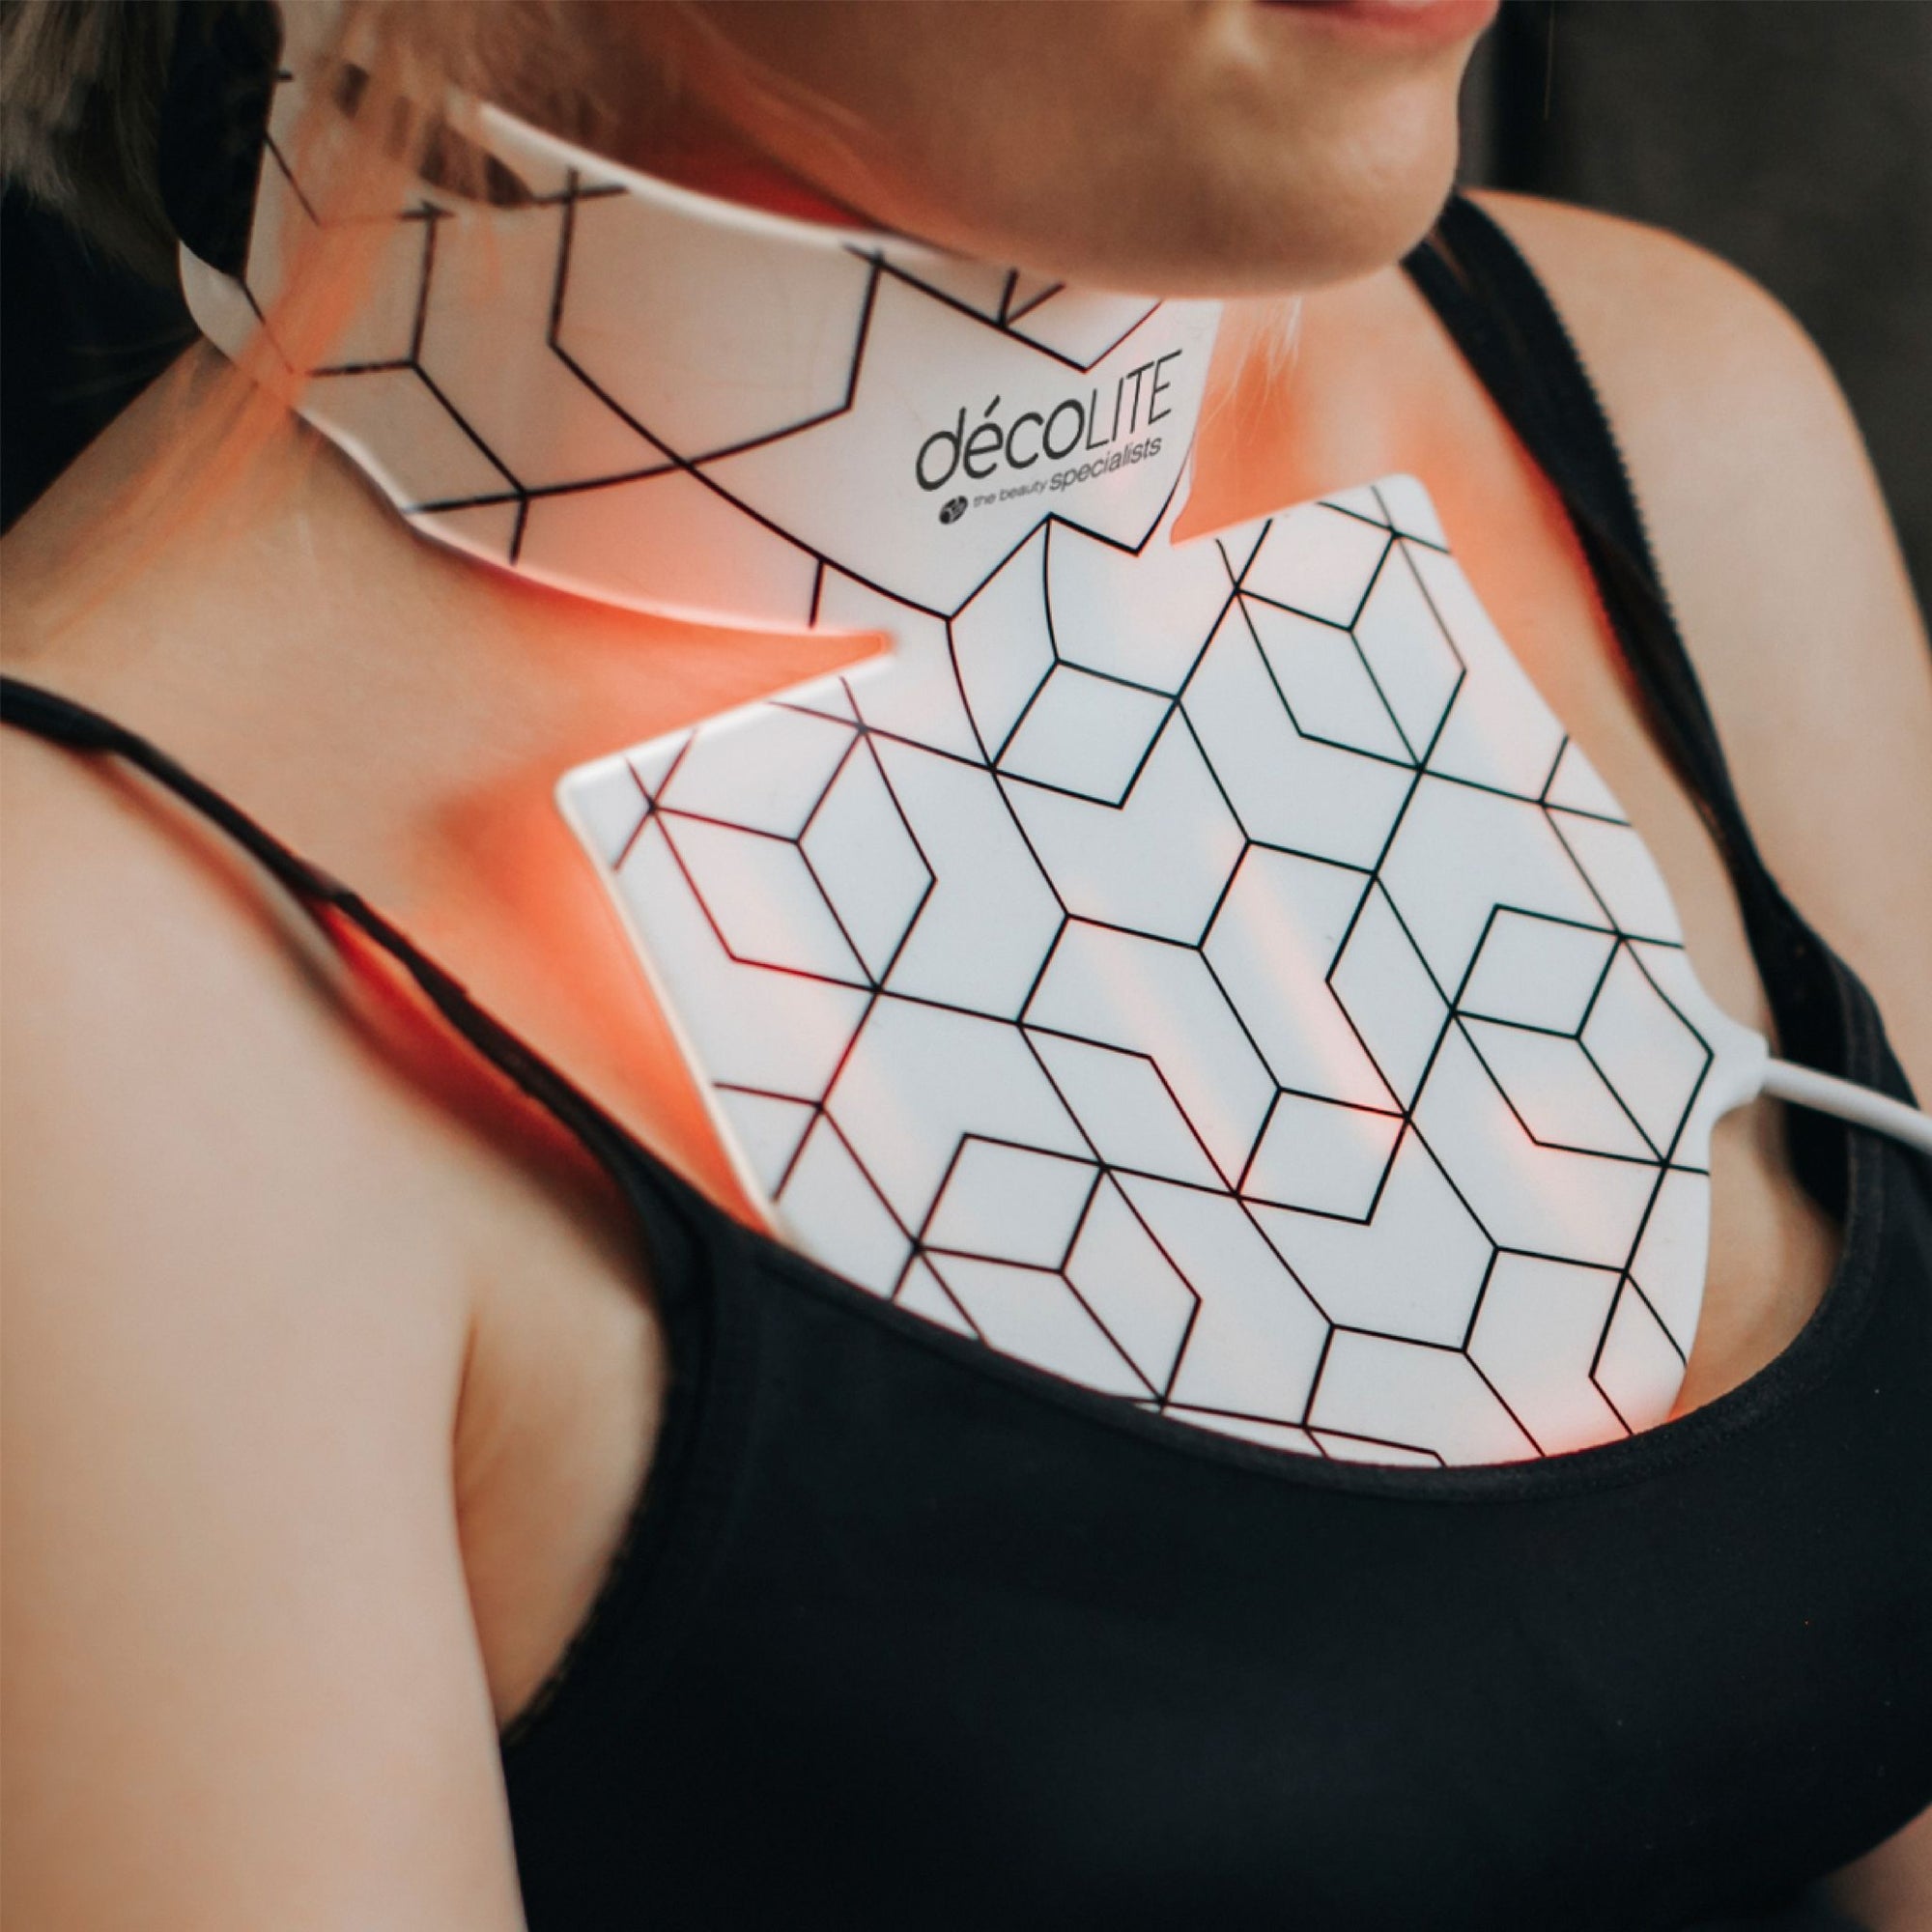 decoLITE LED light treatment being worn around neck and upper chest of female sat down on sofa.